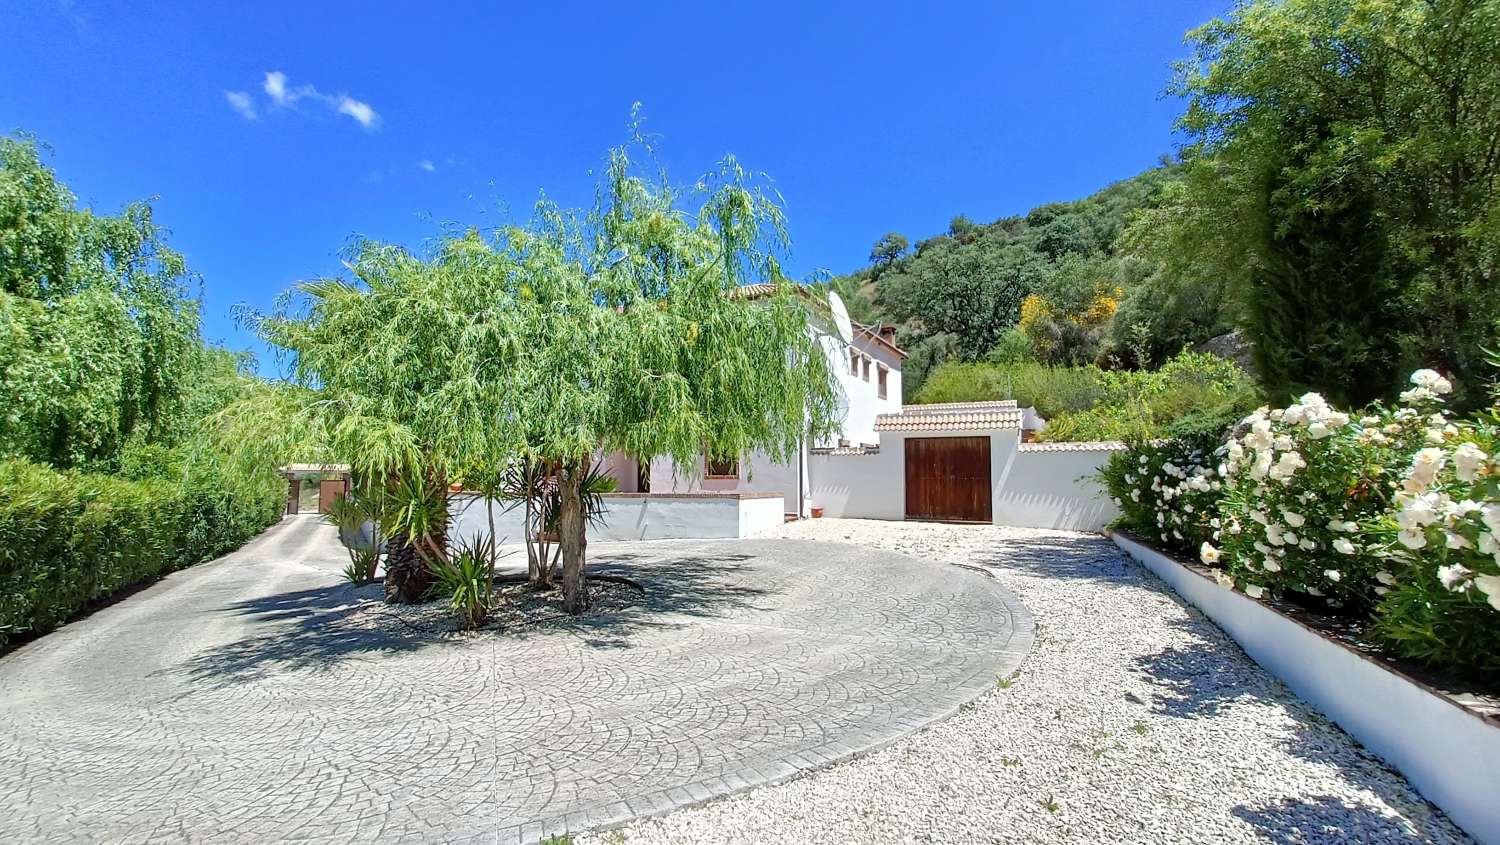 Fantastic 5 bed 5 bath country property with gardens, large pool, games pitch, nice views...